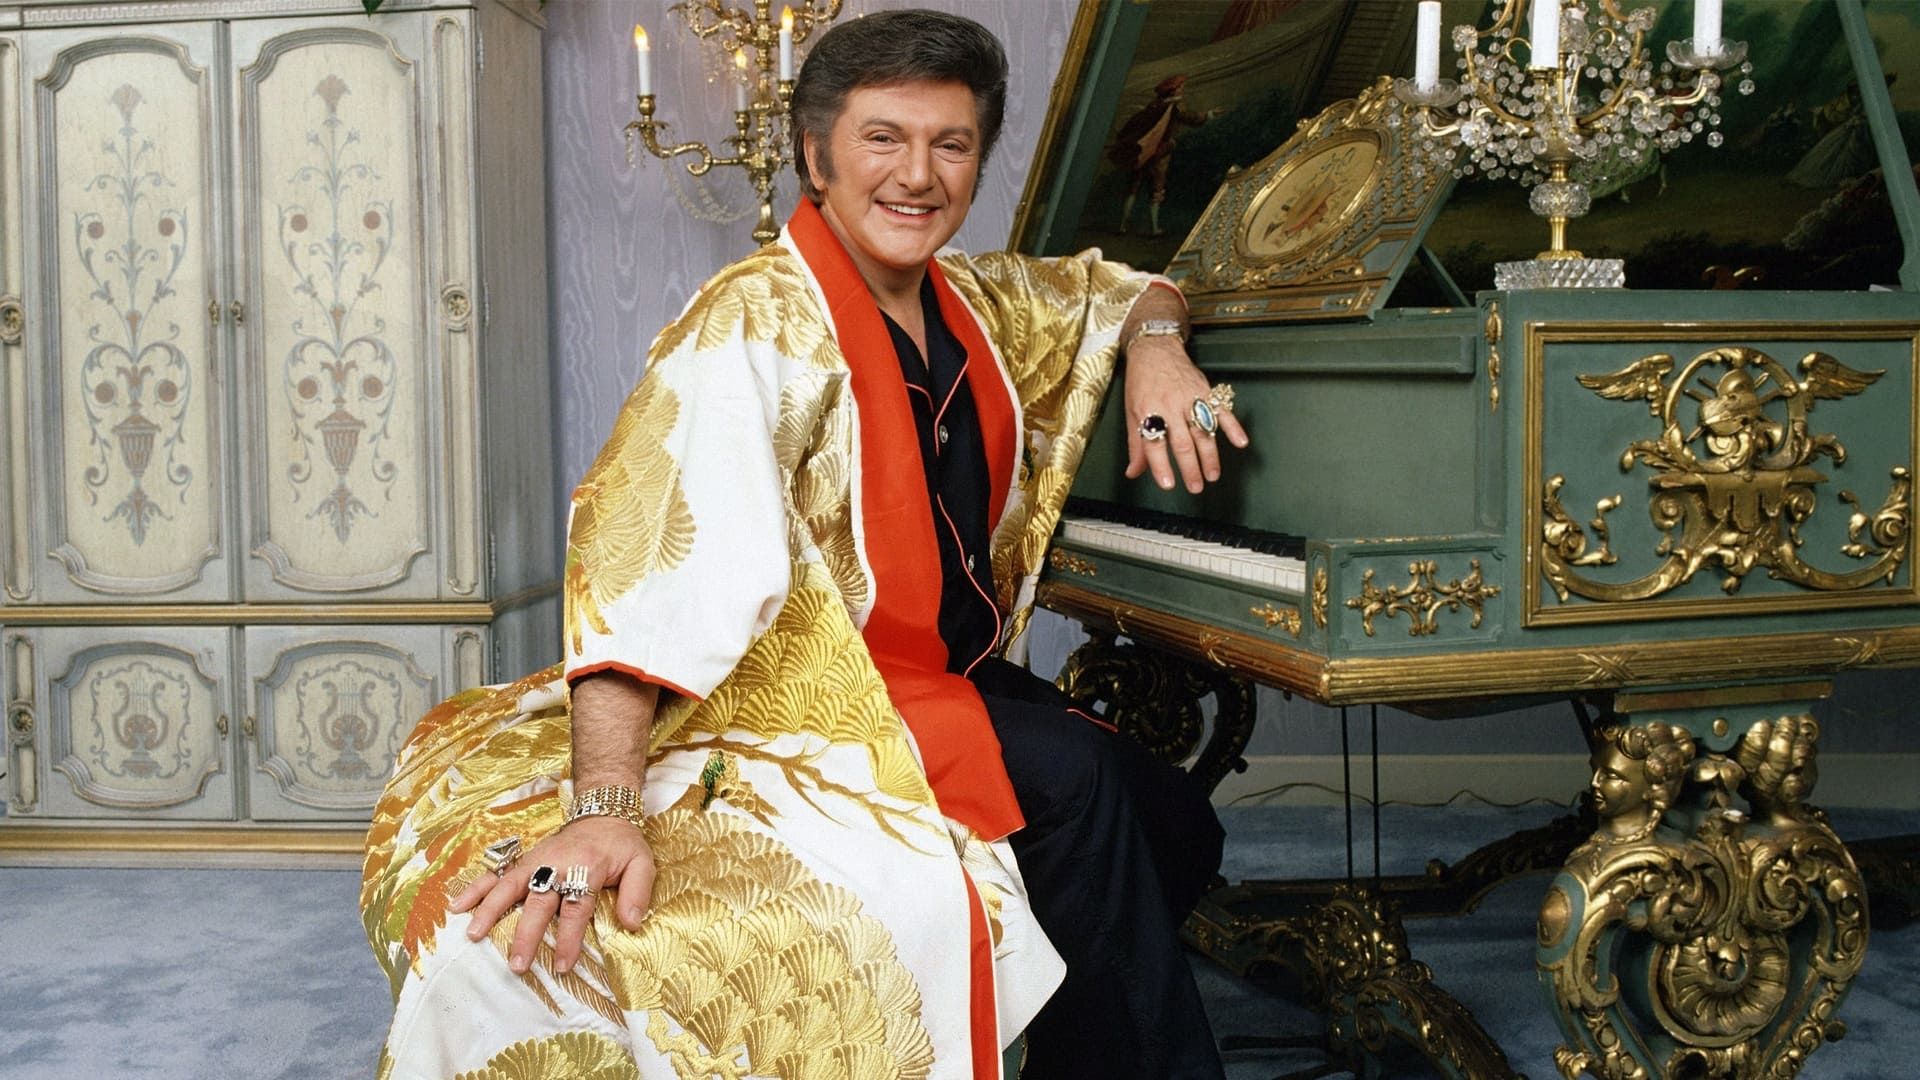 The World of Liberace background